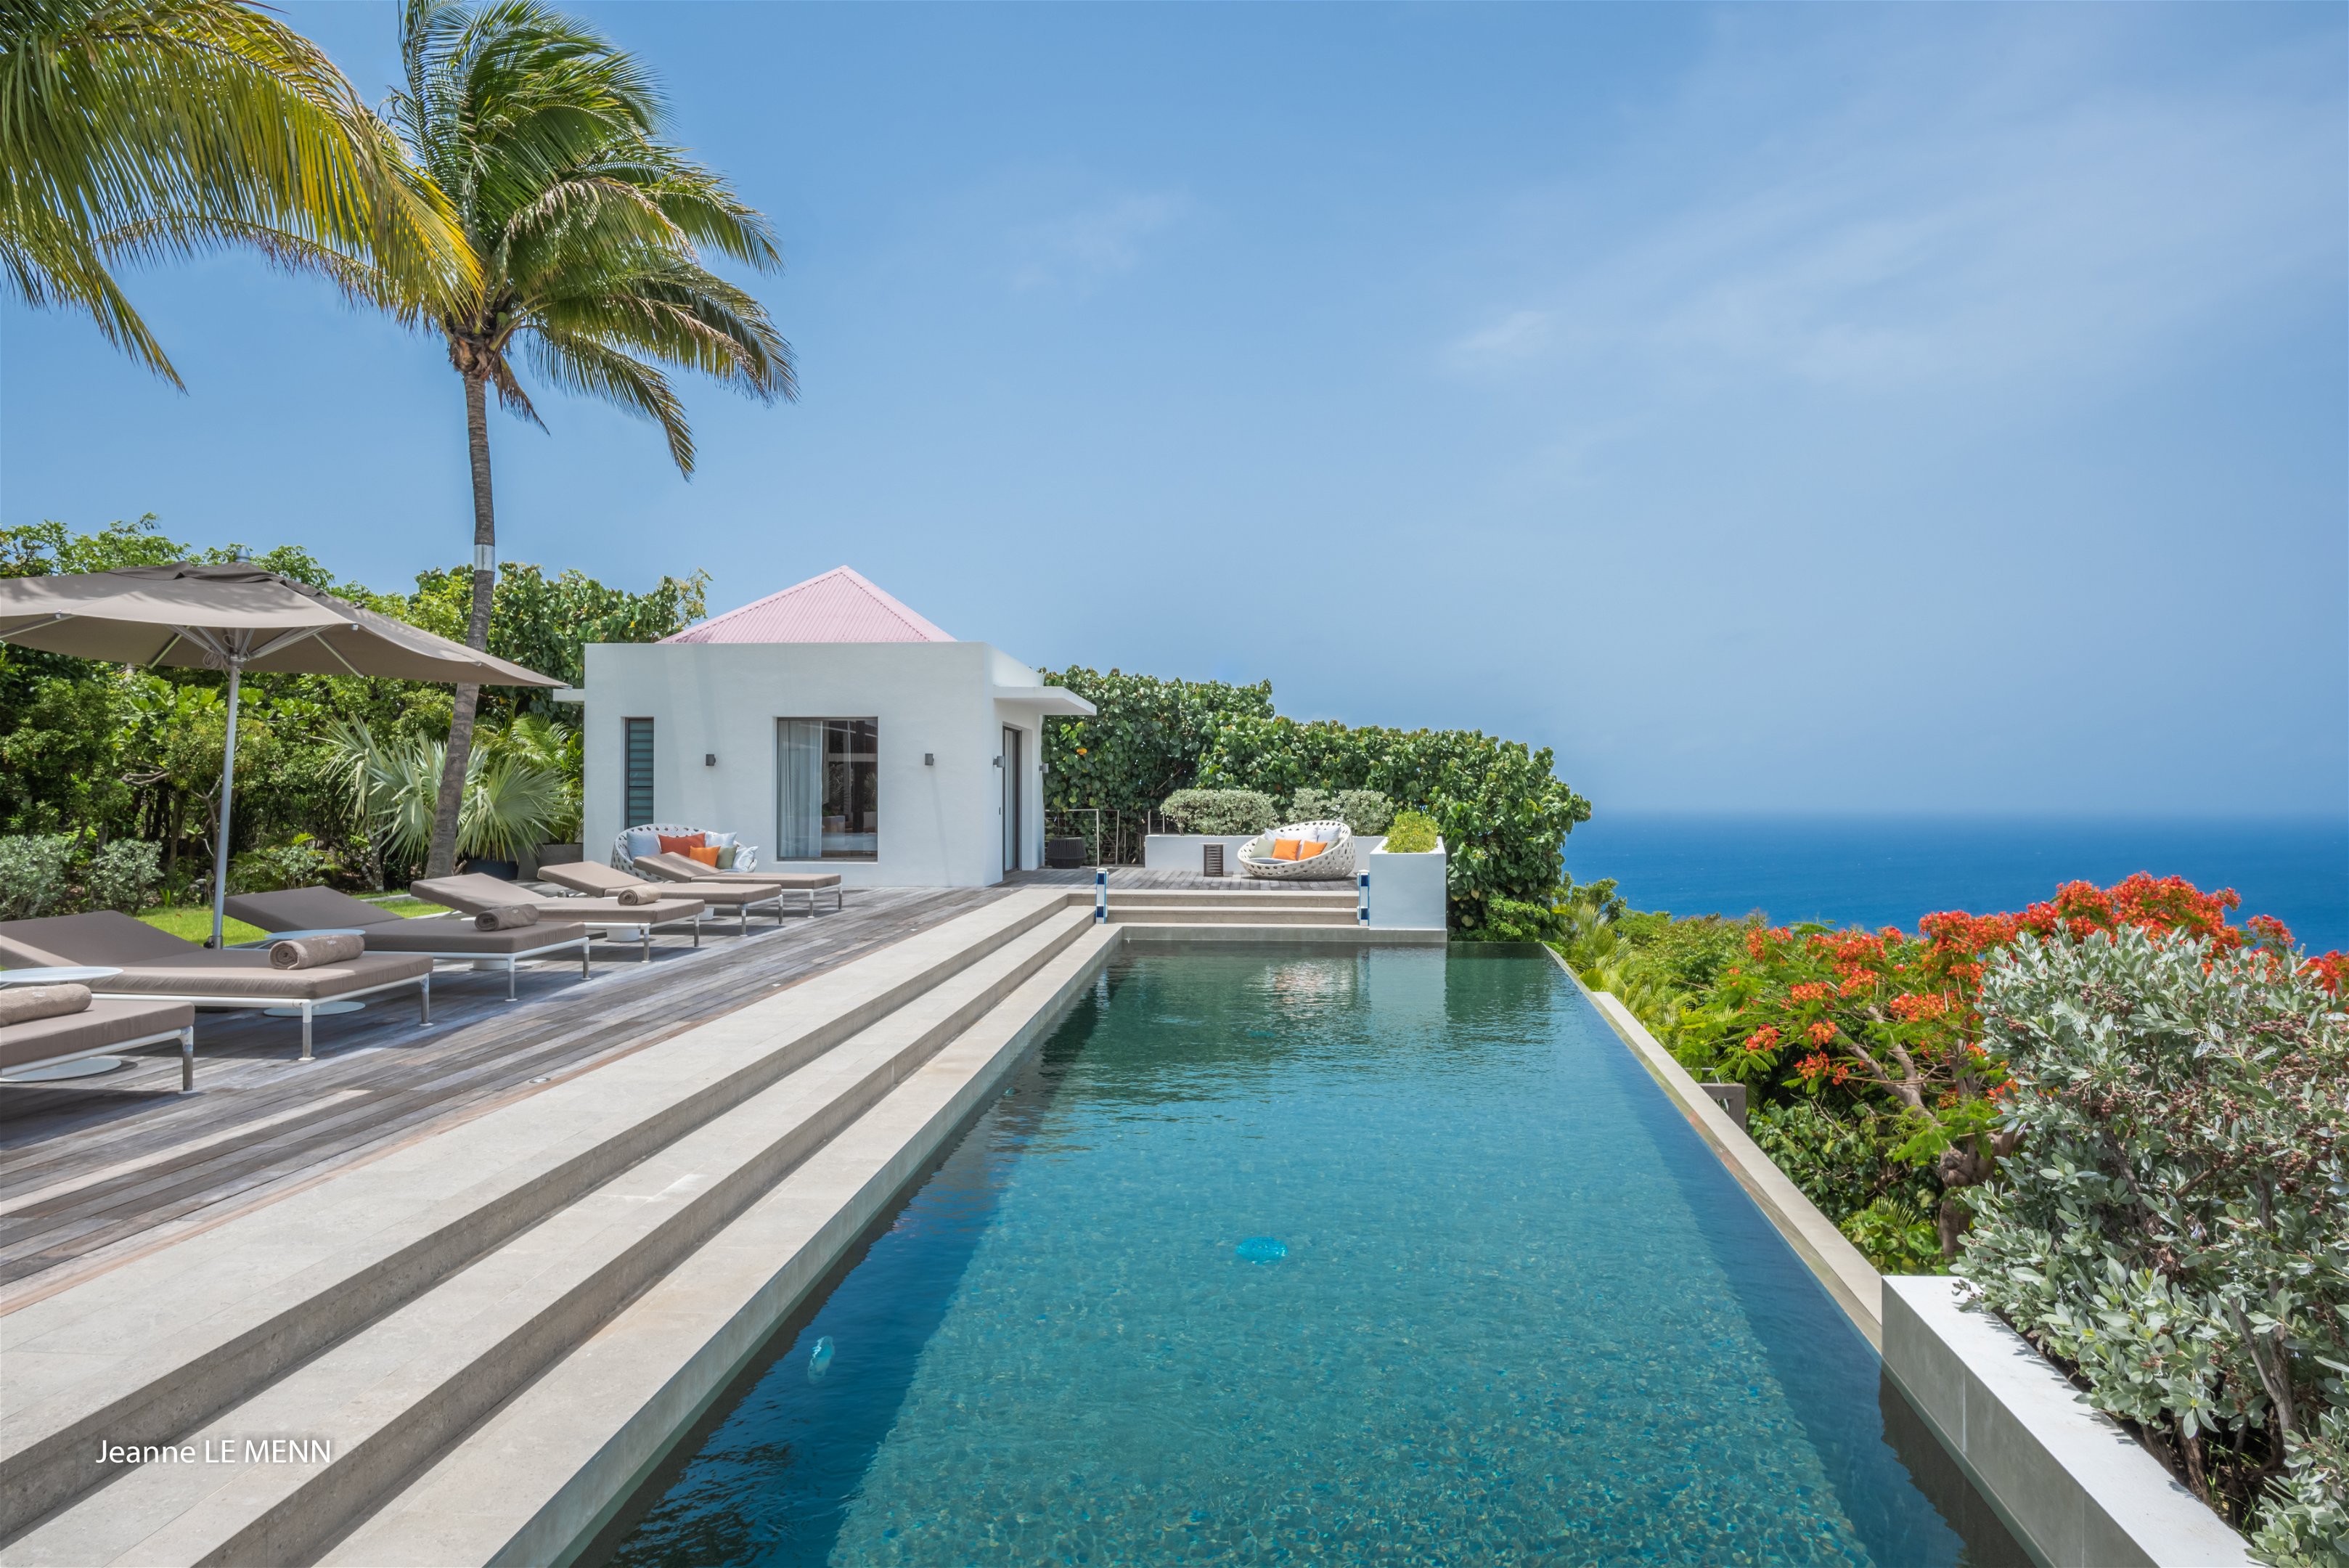 Heated 4 X 18 m pool with beautiful ocean views, expansive terrace with loungers and deckchairs.